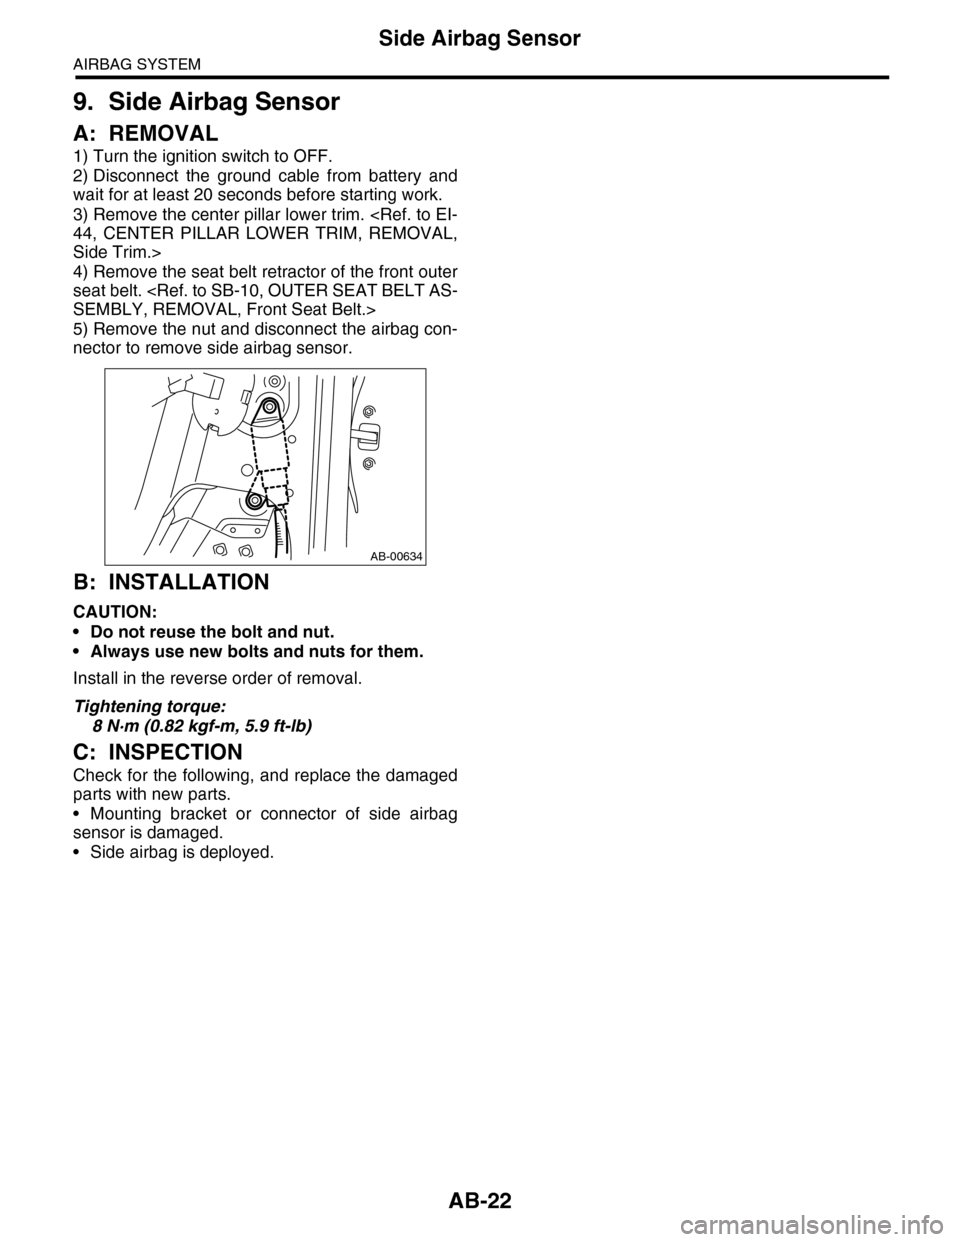 SUBARU TRIBECA 2009 1.G Service Workshop Manual AB-22
Side Airbag Sensor
AIRBAG SYSTEM
9. Side Airbag Sensor
A: REMOVAL
1) Turn the ignition switch to OFF.
2) Disconnect  the  ground  cable  from  battery  and
wait for at least 20 seconds before st